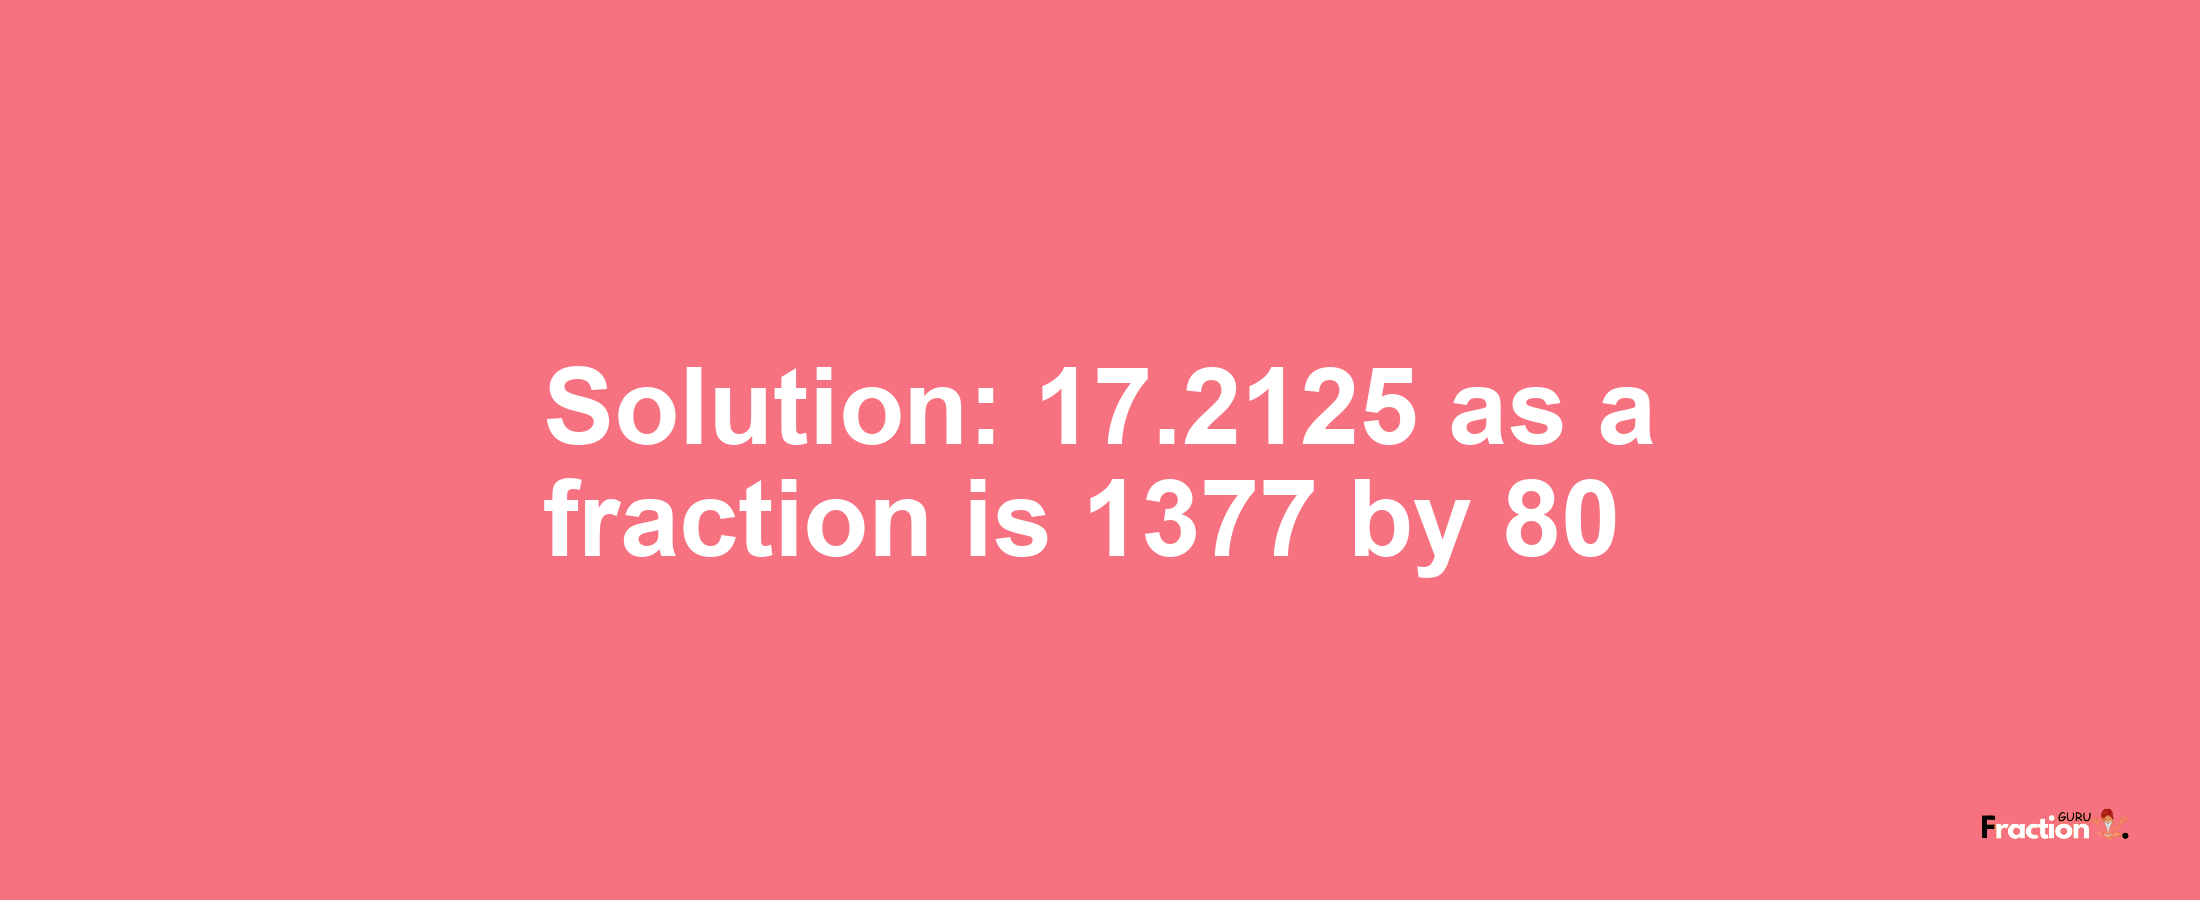 Solution:17.2125 as a fraction is 1377/80